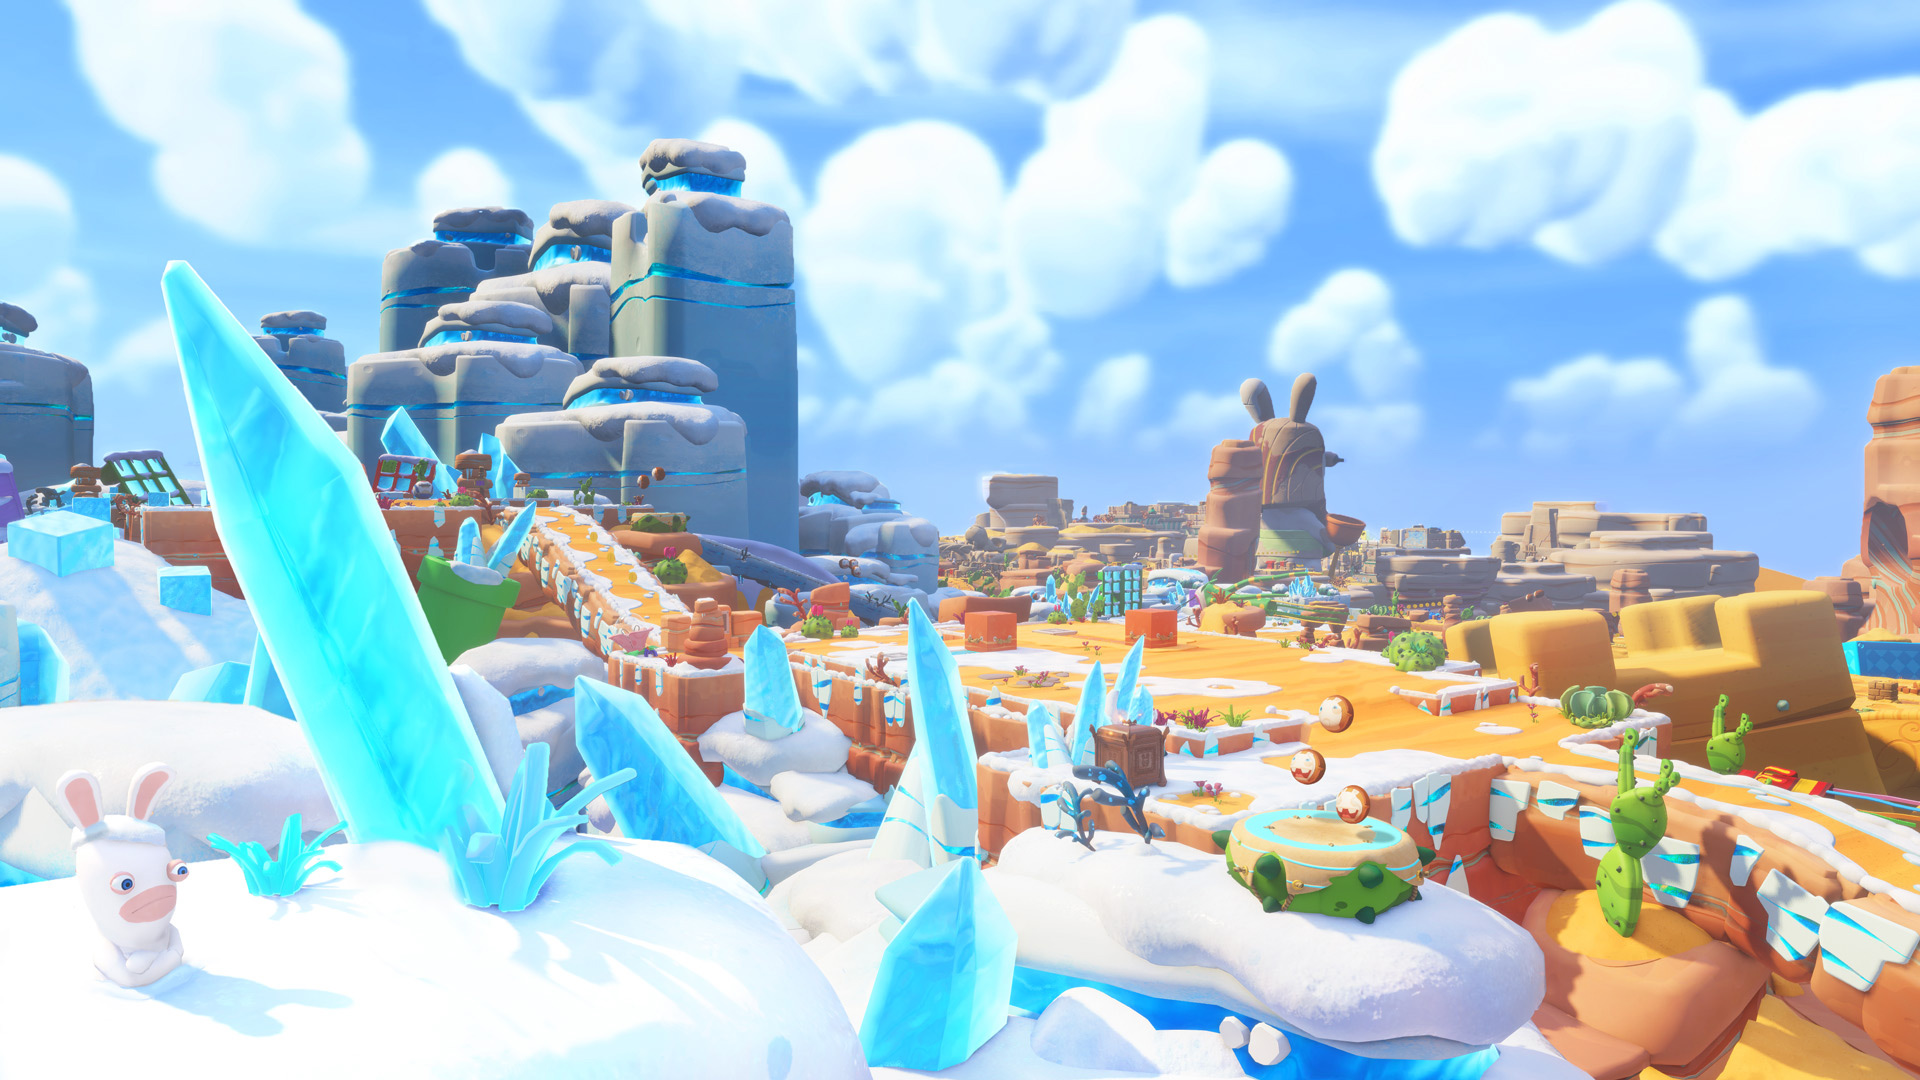 Overview of desert and snow environment — Mario + Rabbids Kingdom Battle